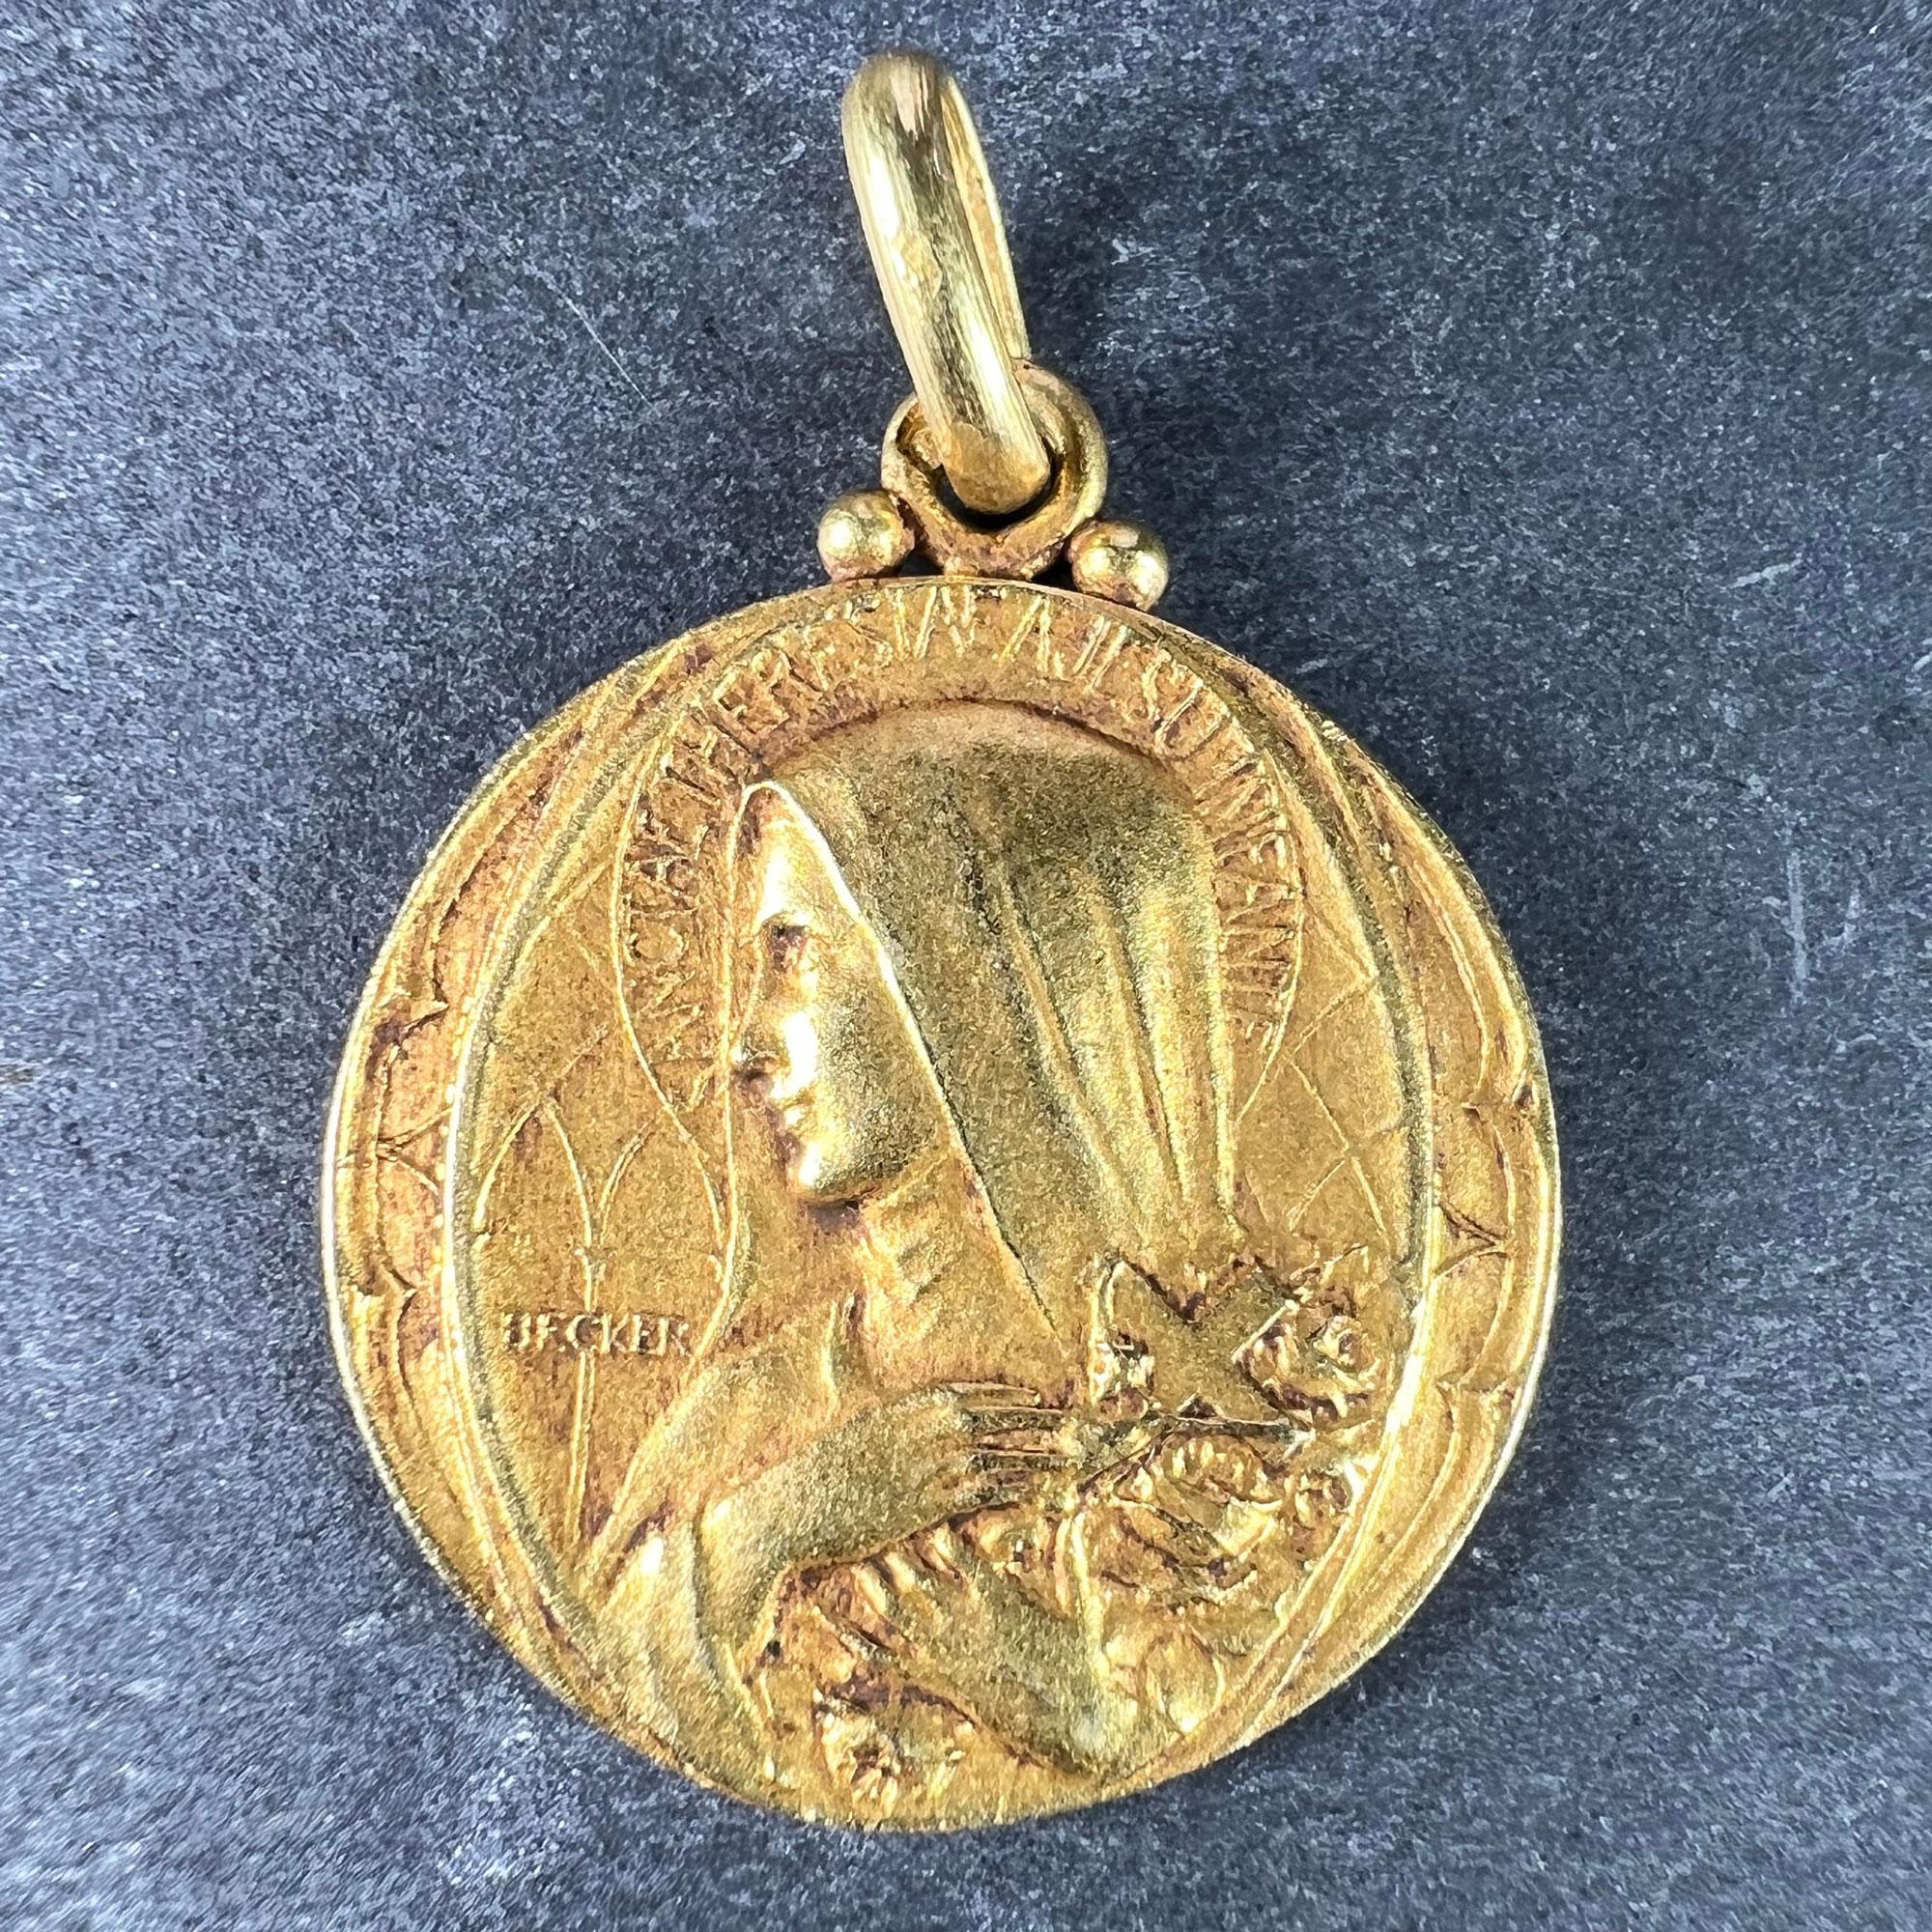 A French 18 karat (18K) yellow gold charm pendant designed as a medal depicting Saint Therese with a halo with the phrase 'SANCTAE THERESIAE A JESU INFANTE' (Saint Therese of the Infant Jesus) holding a crucifix and some roses, the surround with